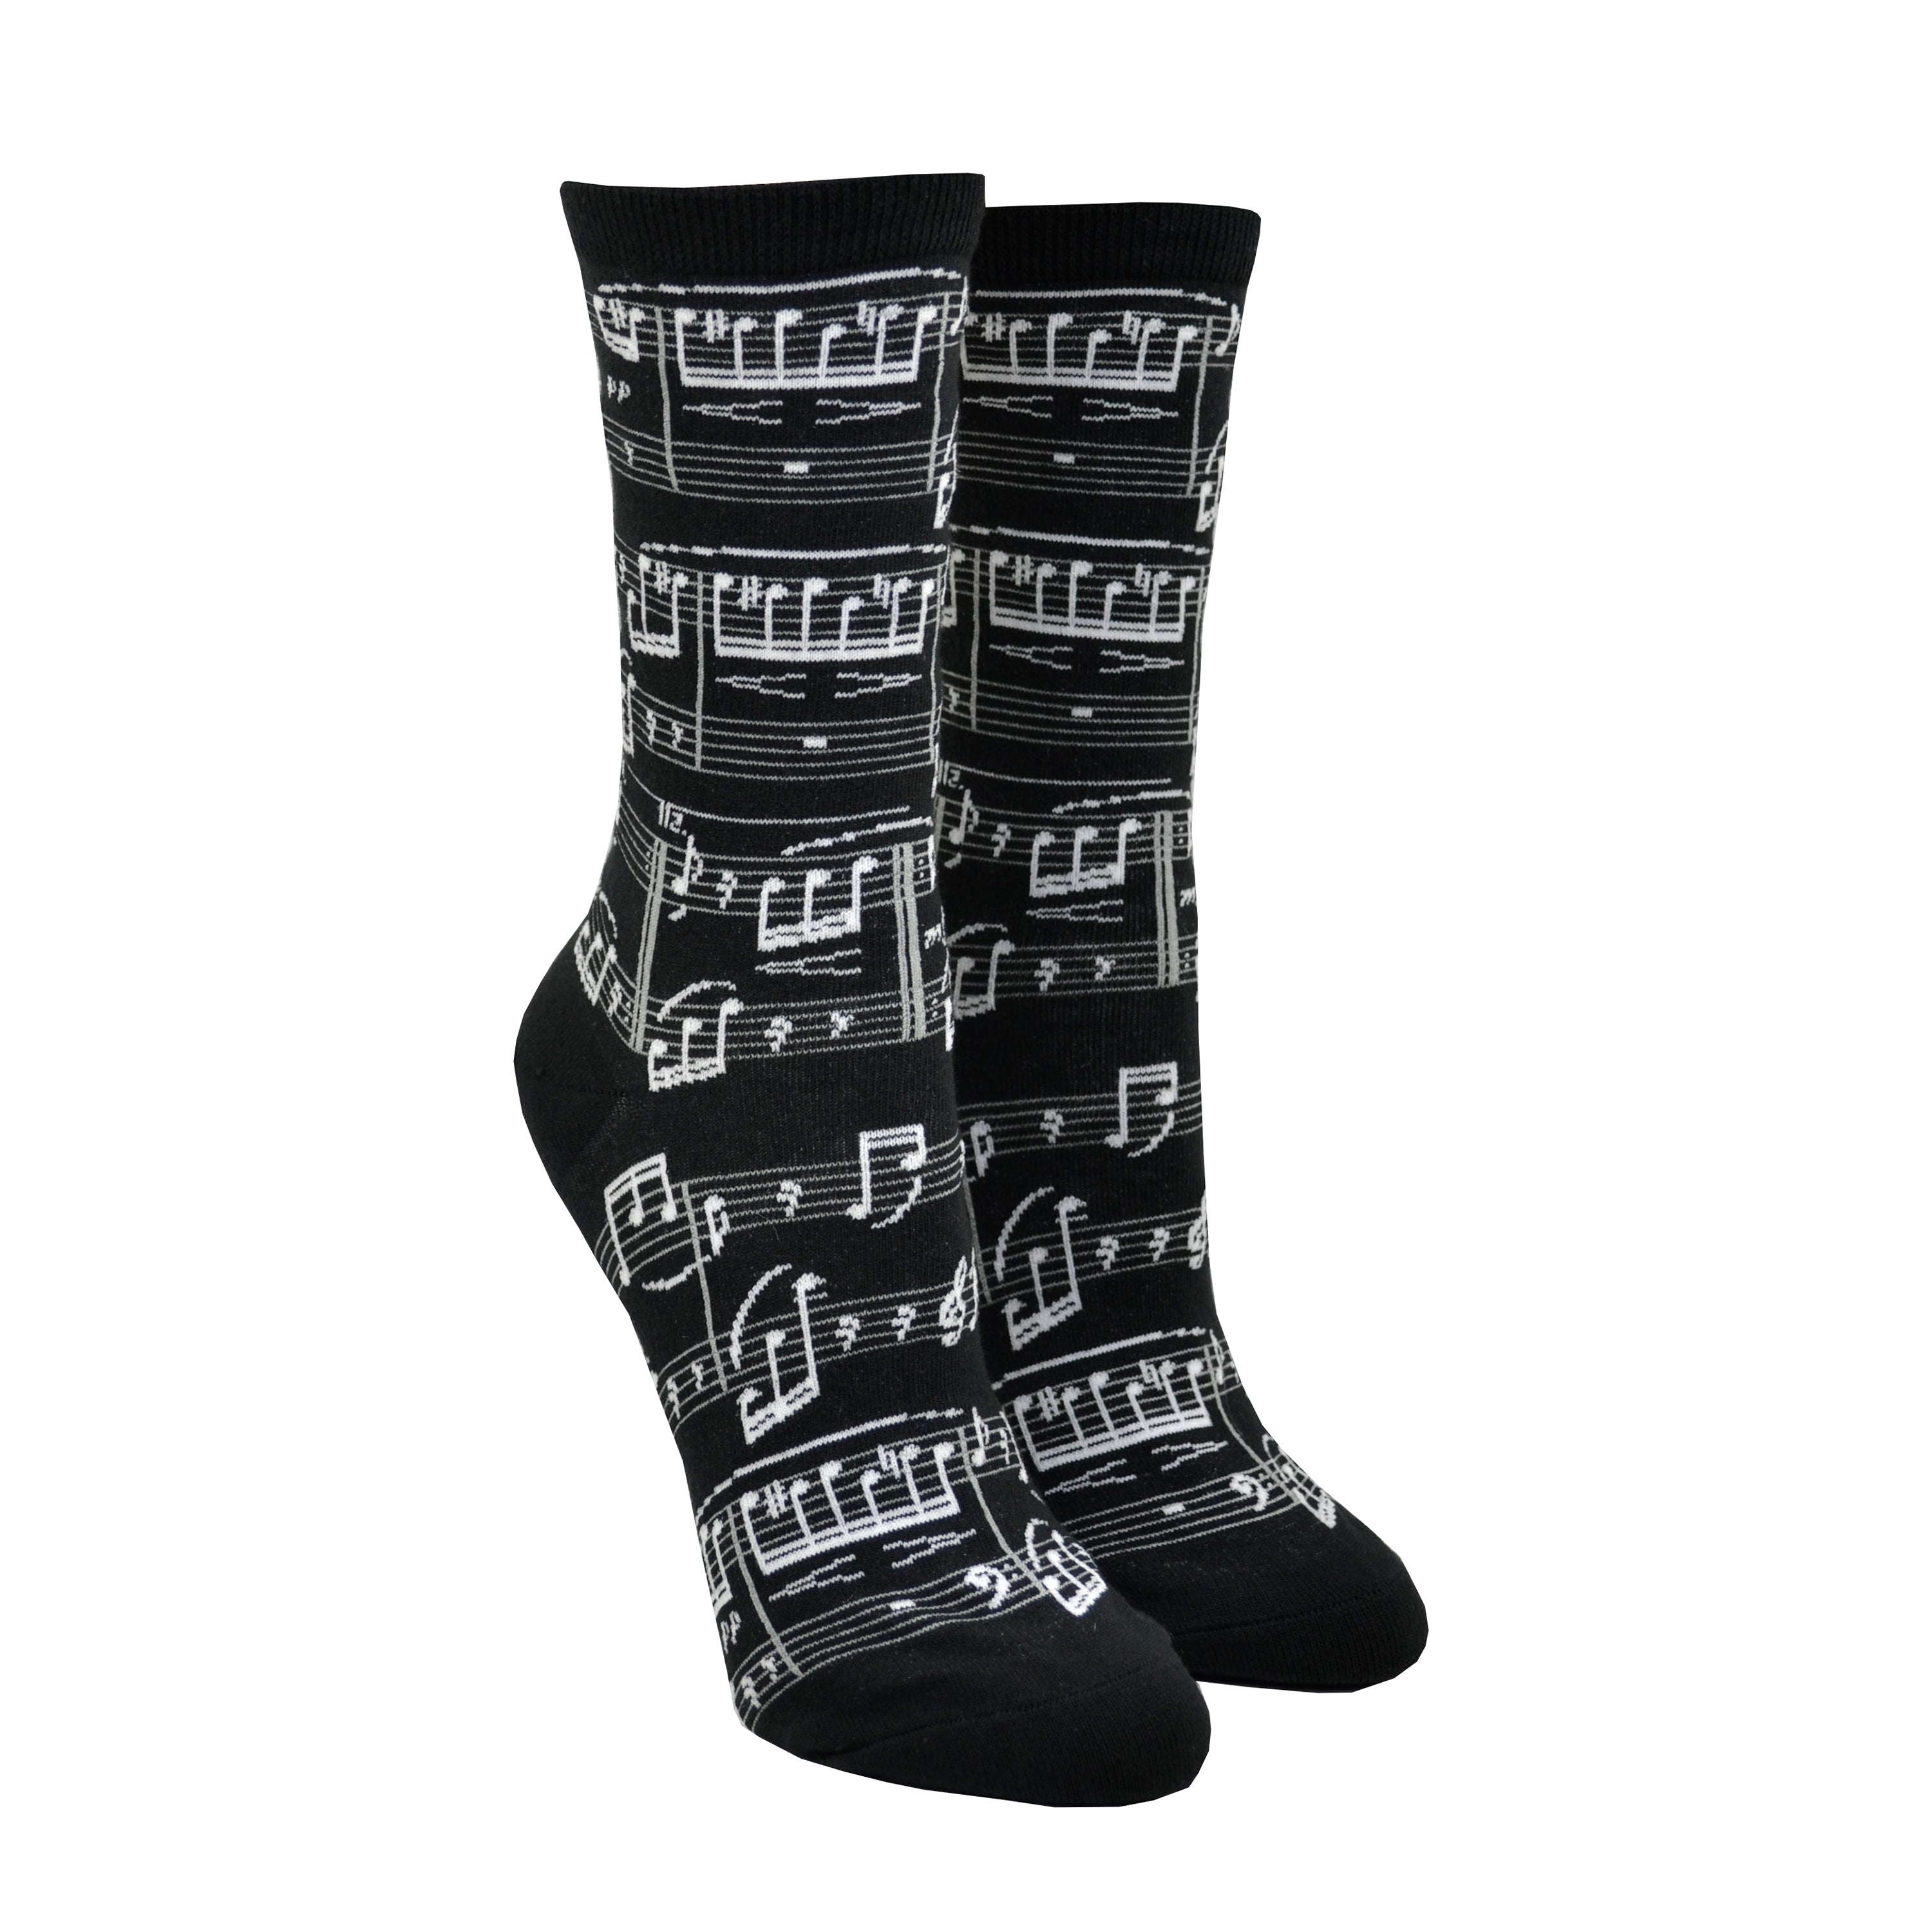 Shown on a foot form, a pair of Mod Socks’ black cotton women's crew socks with white print of small sheet music and musical notes